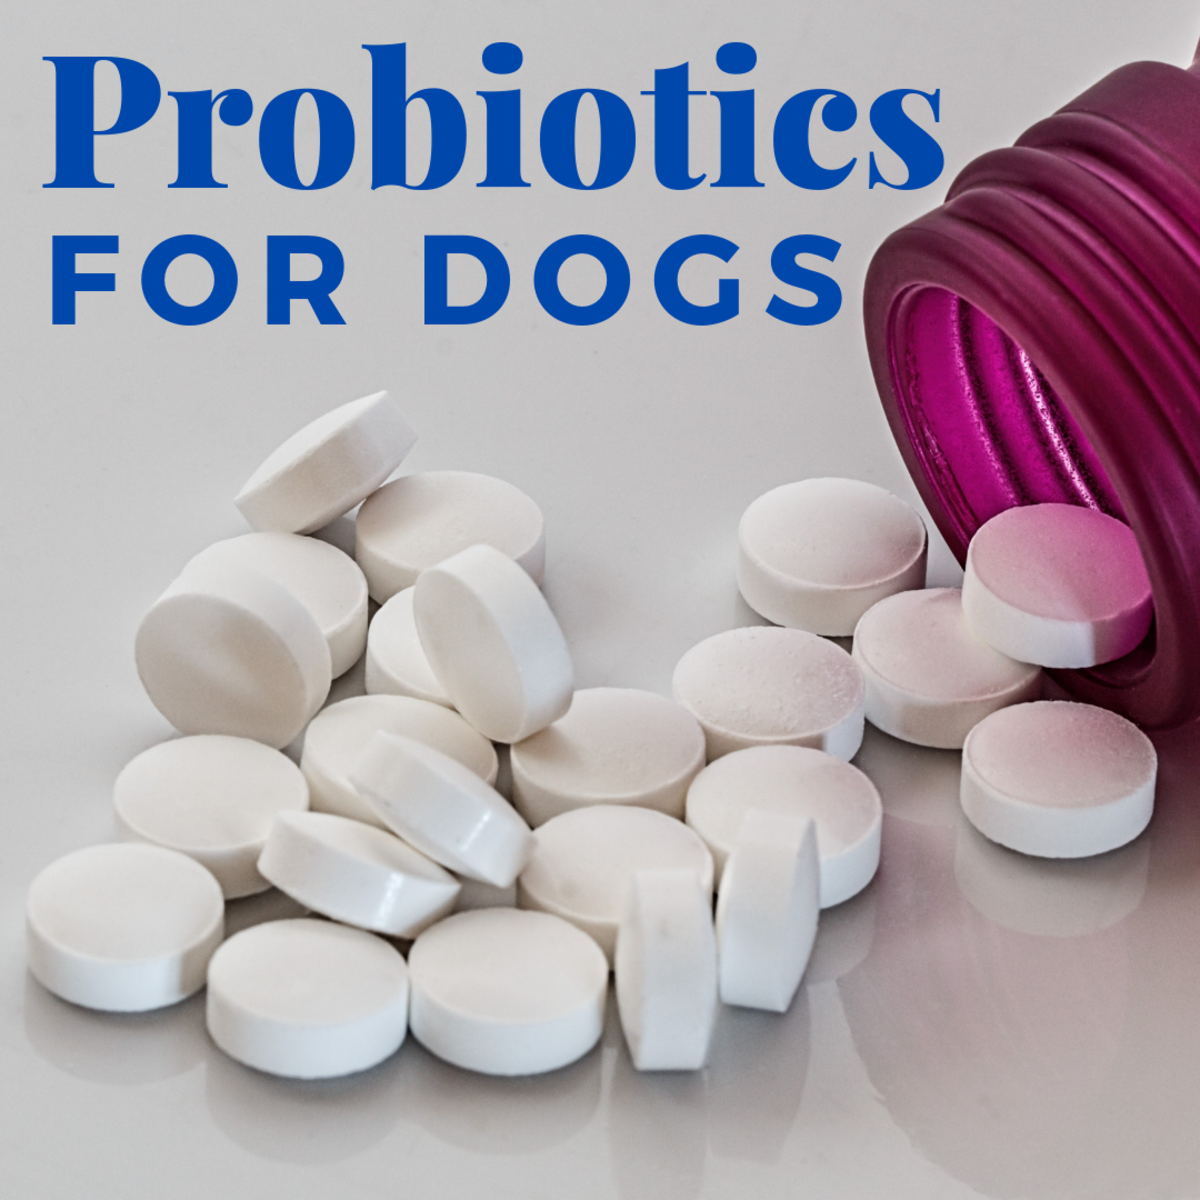 If used properly, probiotics can help promote healthy bacteria in your dog's gut. 